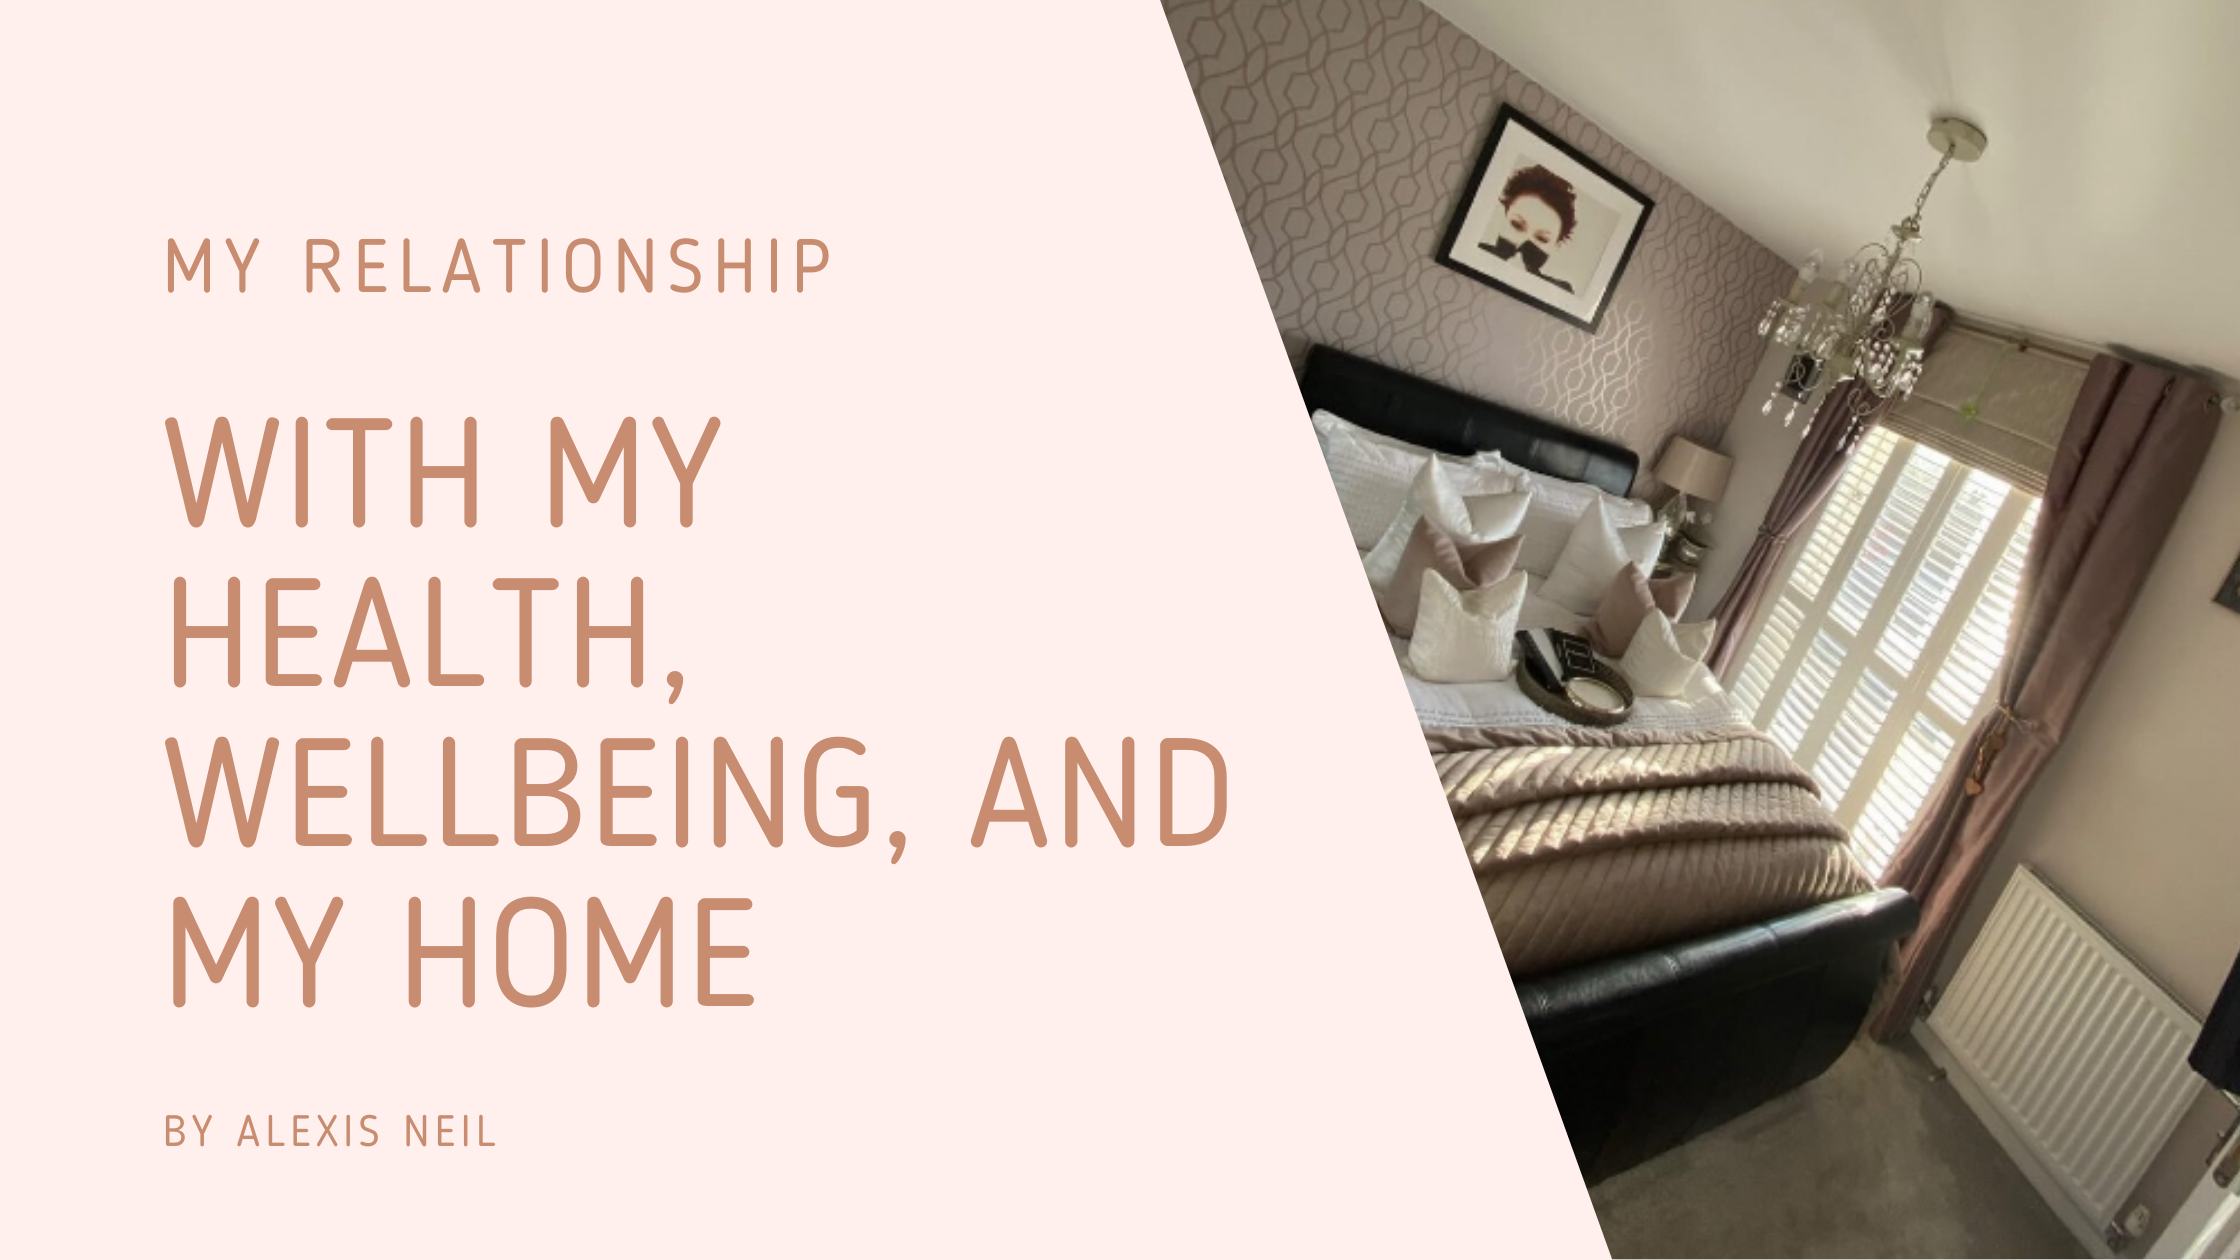 My relationship with health and wellbeing, and my home